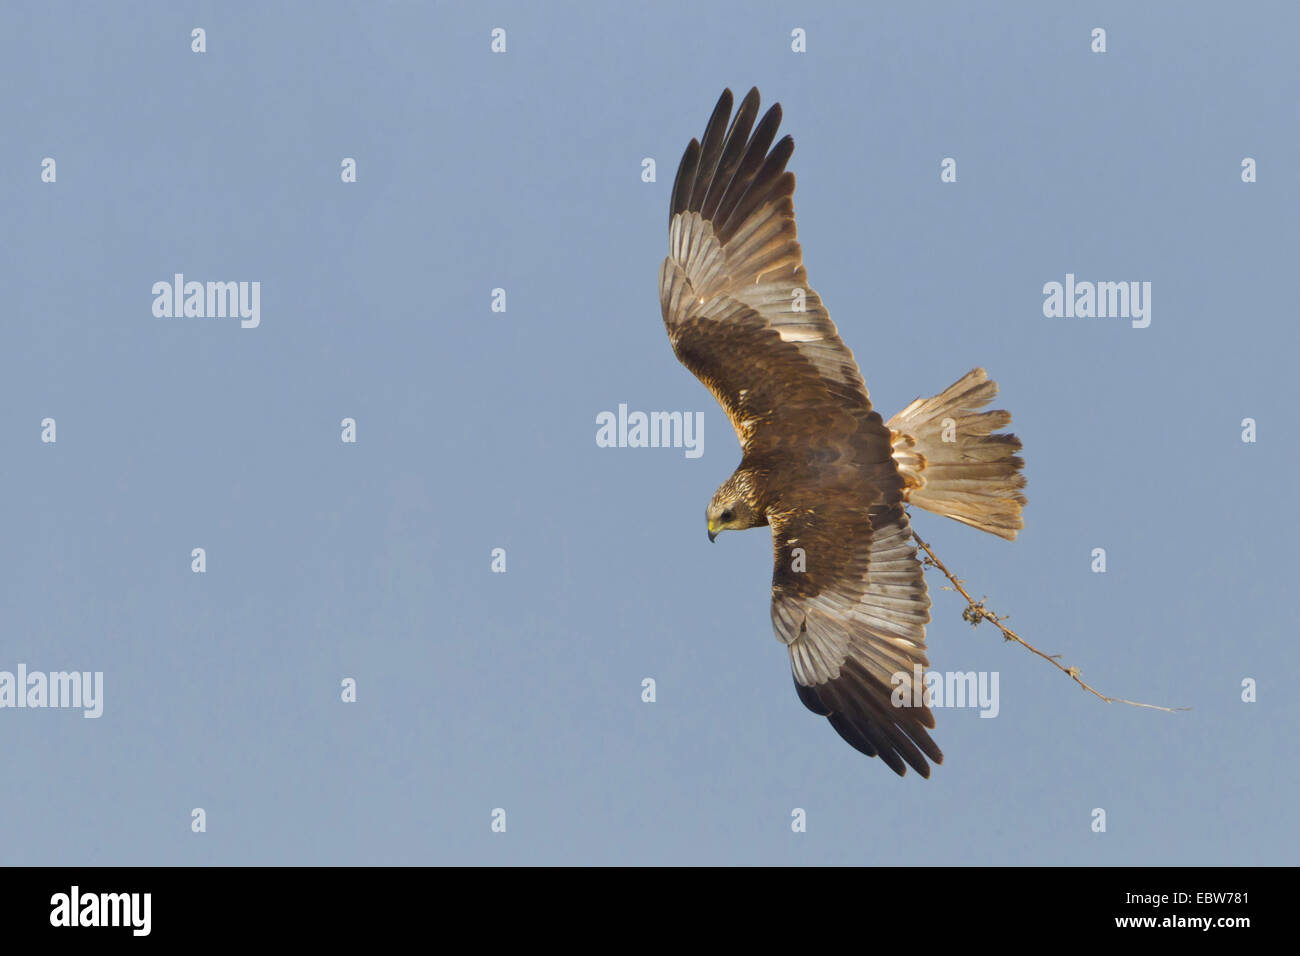 Western Marsh Harrier (Circus aeruginosus), flying with nesting material in the claws, Germany, Rhineland-Palatinate Stock Photo